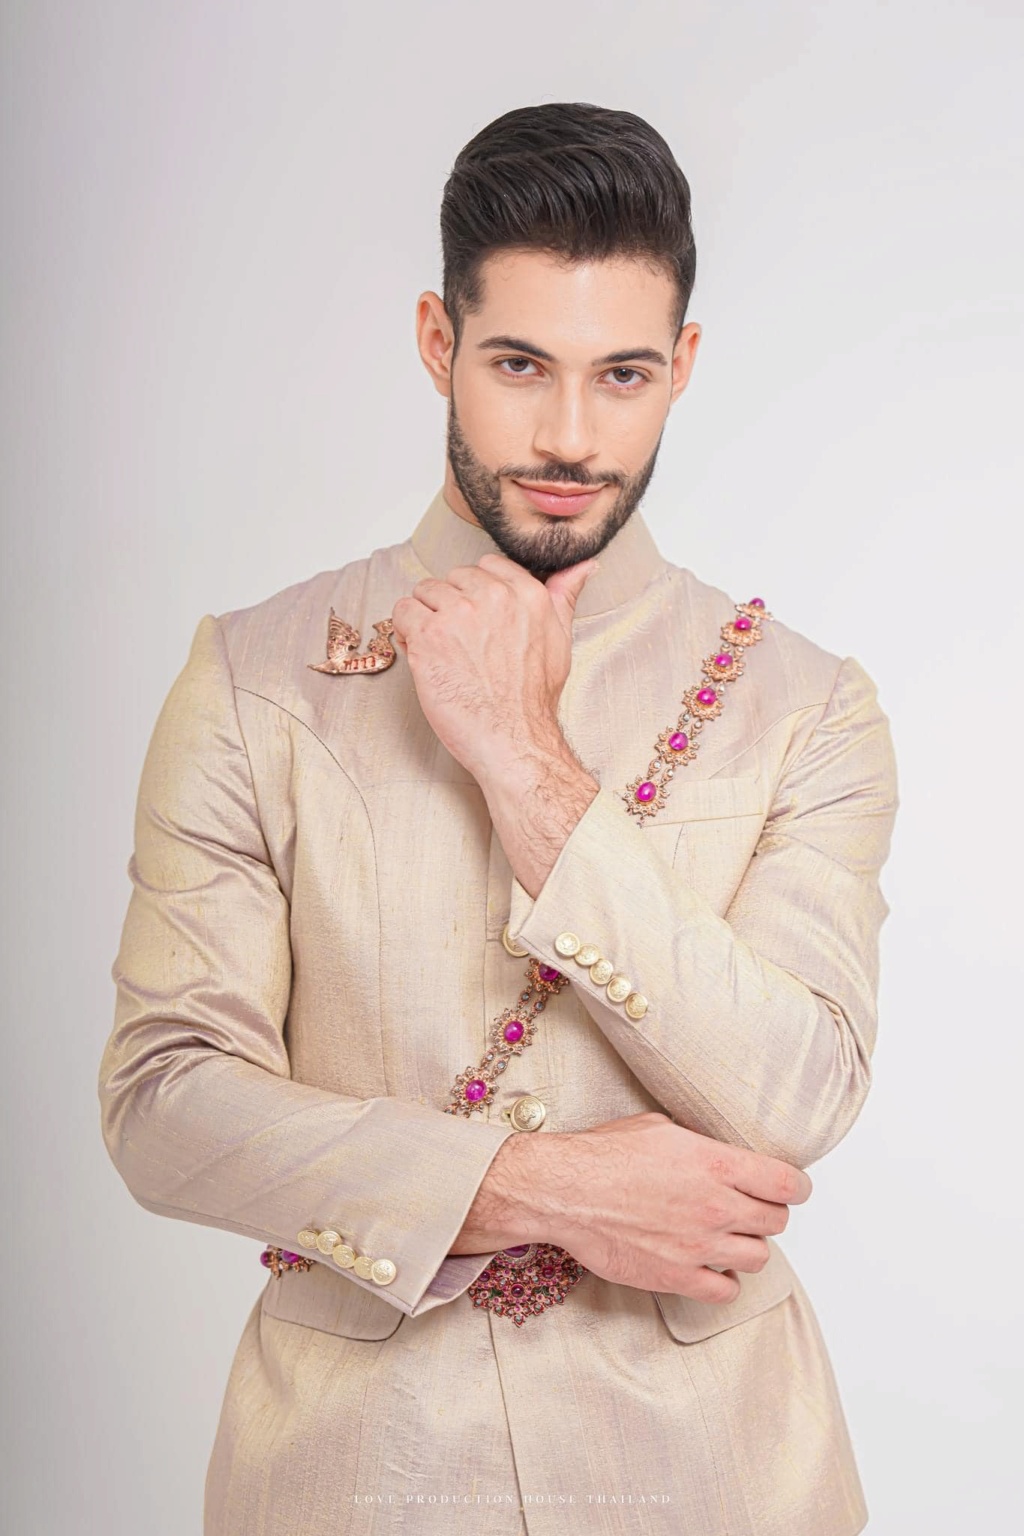 Manuel Franco - MISTER INTERNATIONAL 2022 - Official Thread (DOMINICAN REPUBLIC) Thai Version - Page 3 34076910